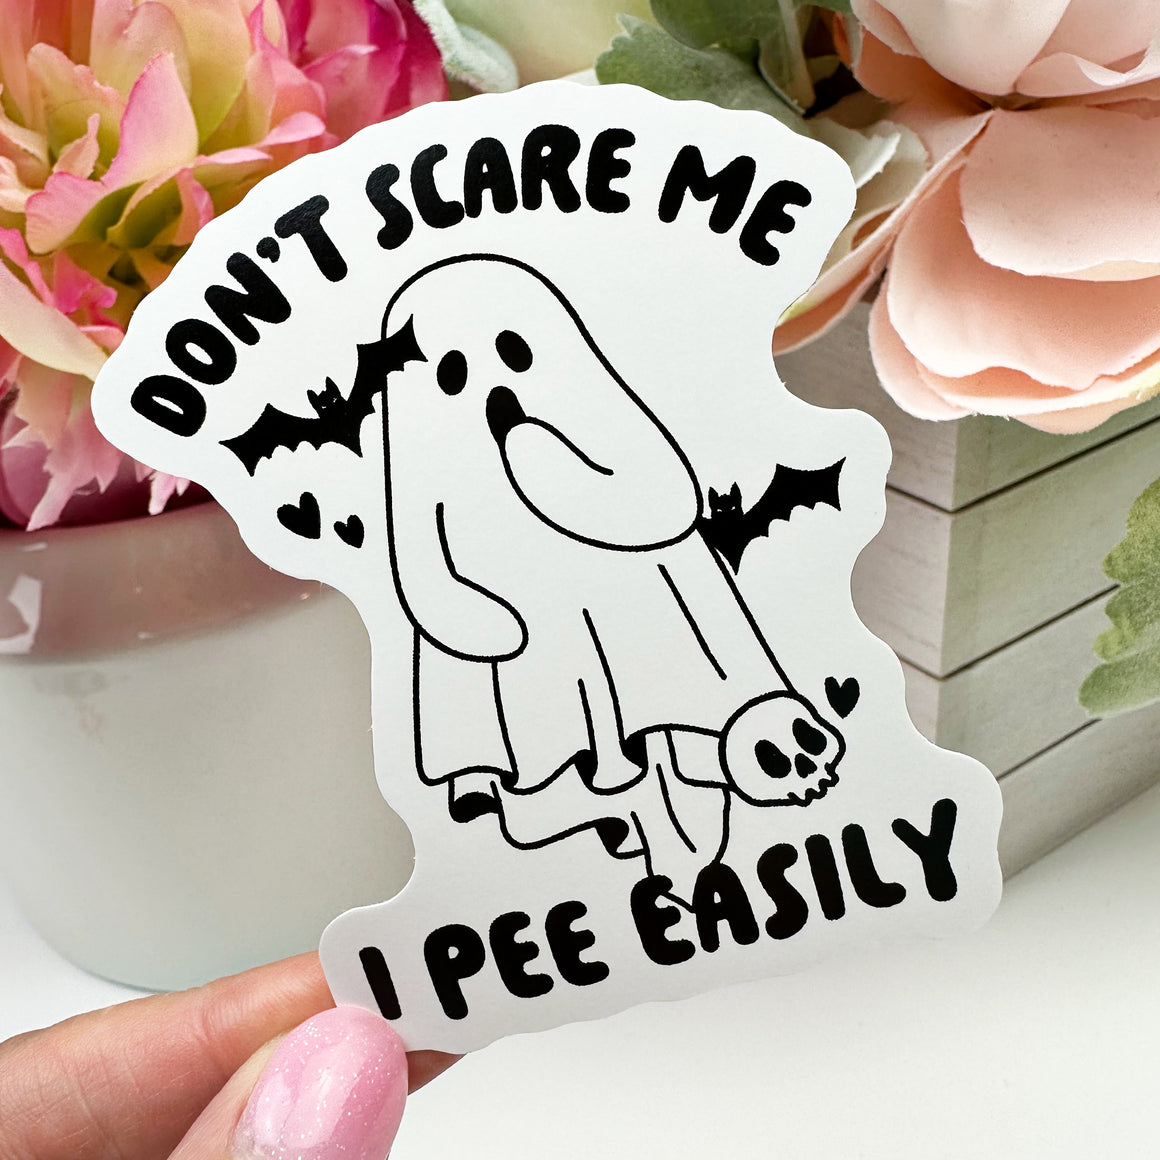 Don't Scare Me I Pee Easily Vinyl Decal